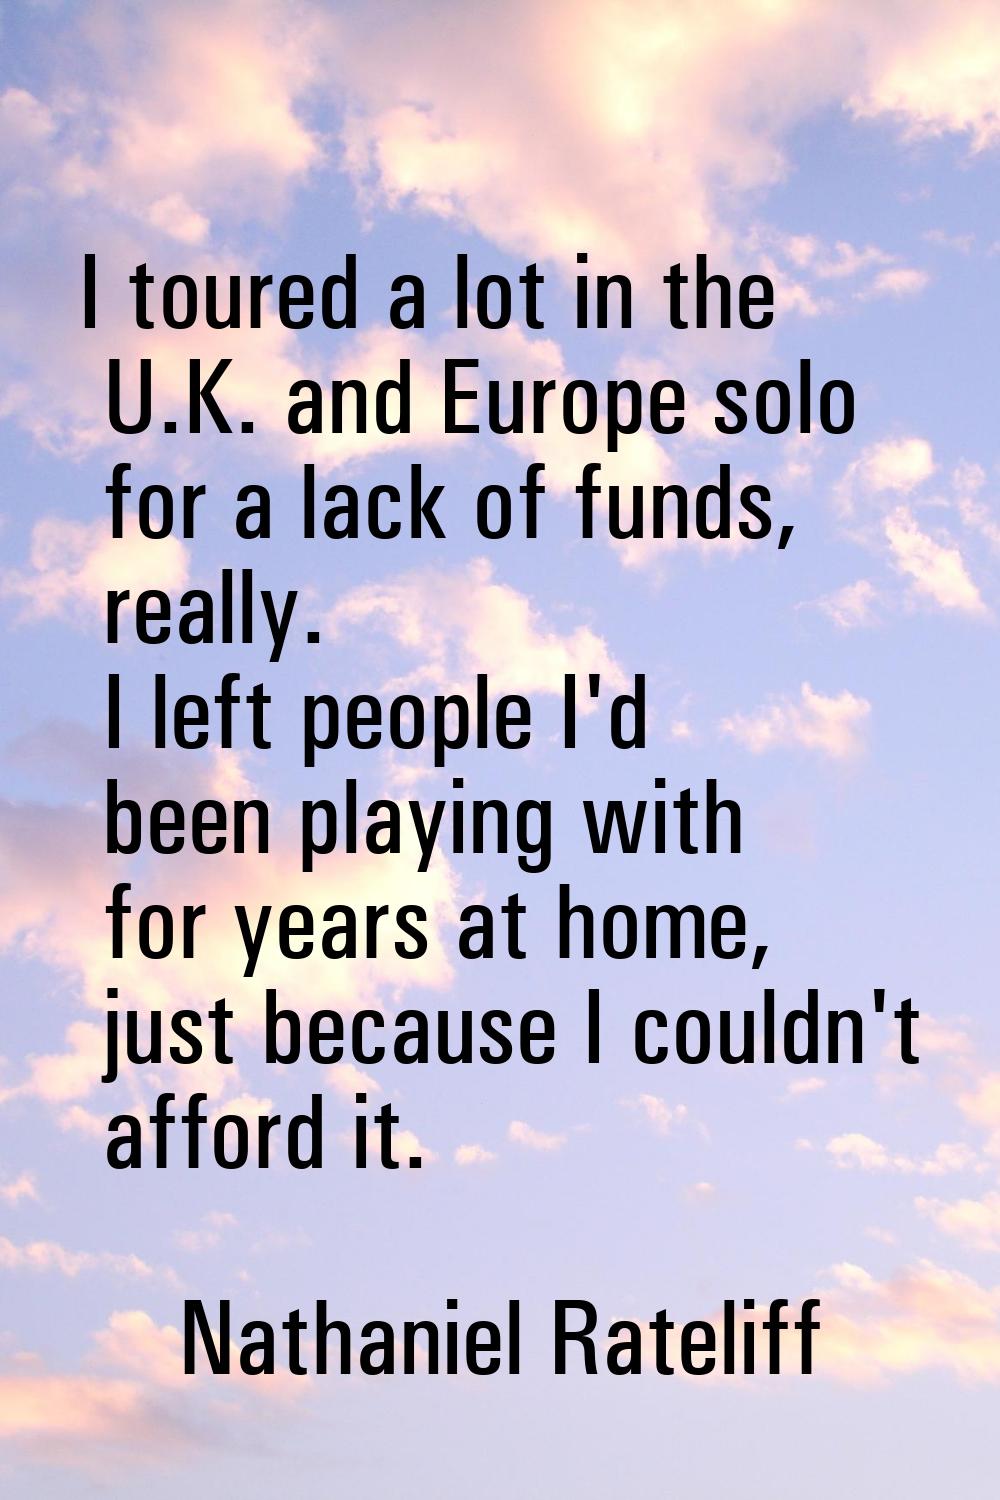 I toured a lot in the U.K. and Europe solo for a lack of funds, really. I left people I'd been play